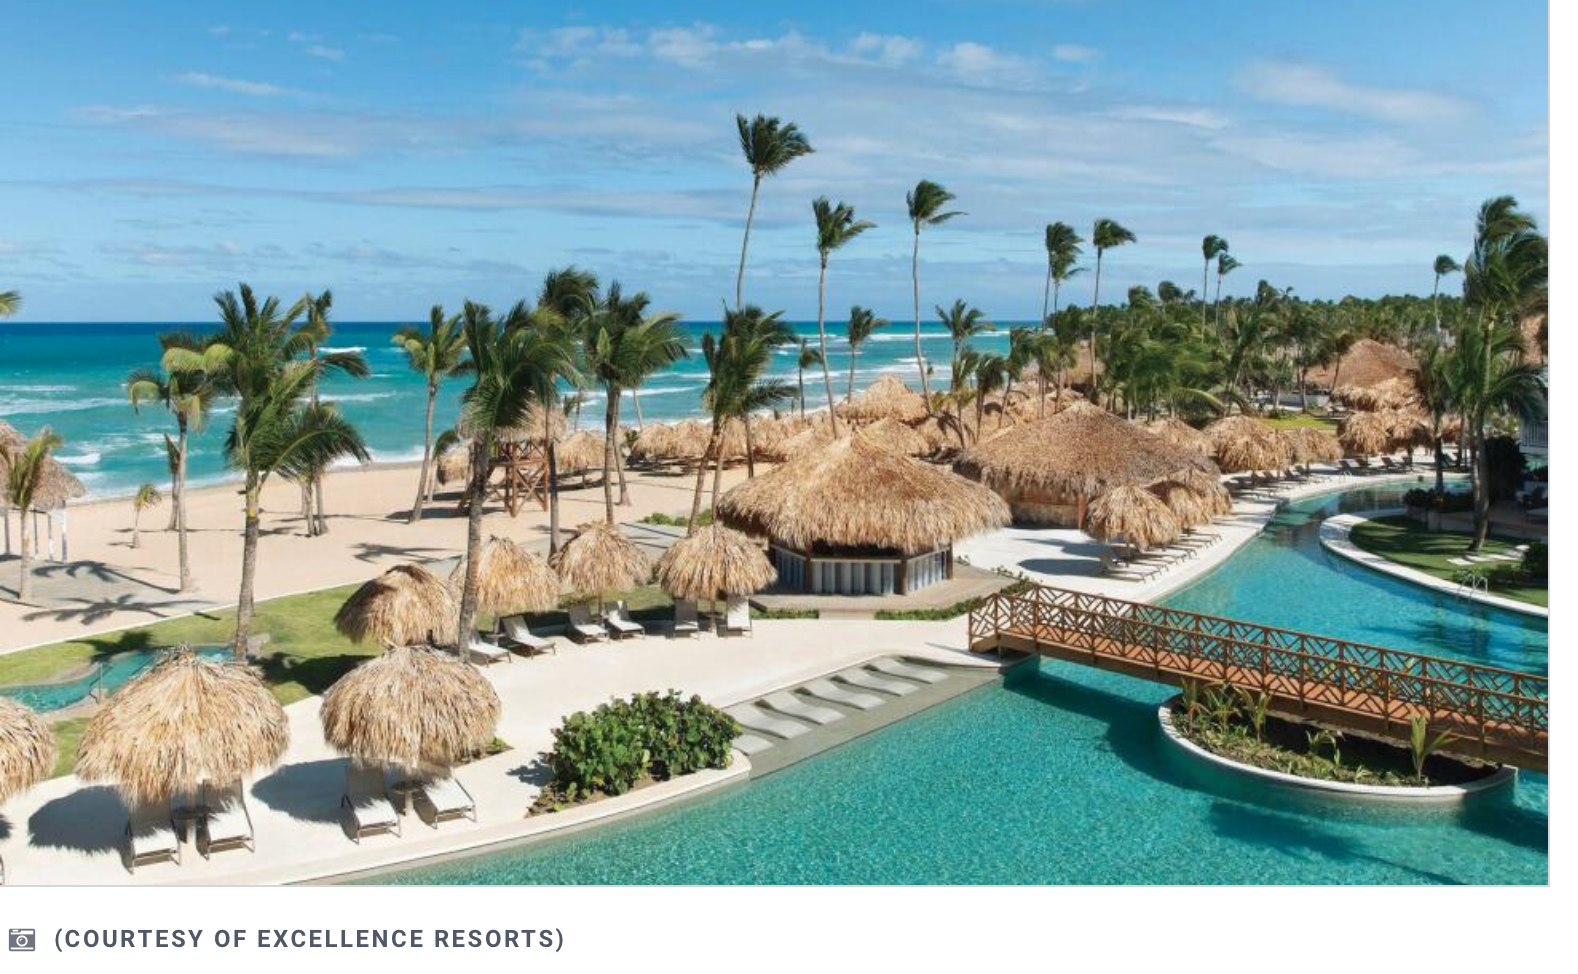 The 9 Best Adults-Only Resorts in Punta Cana